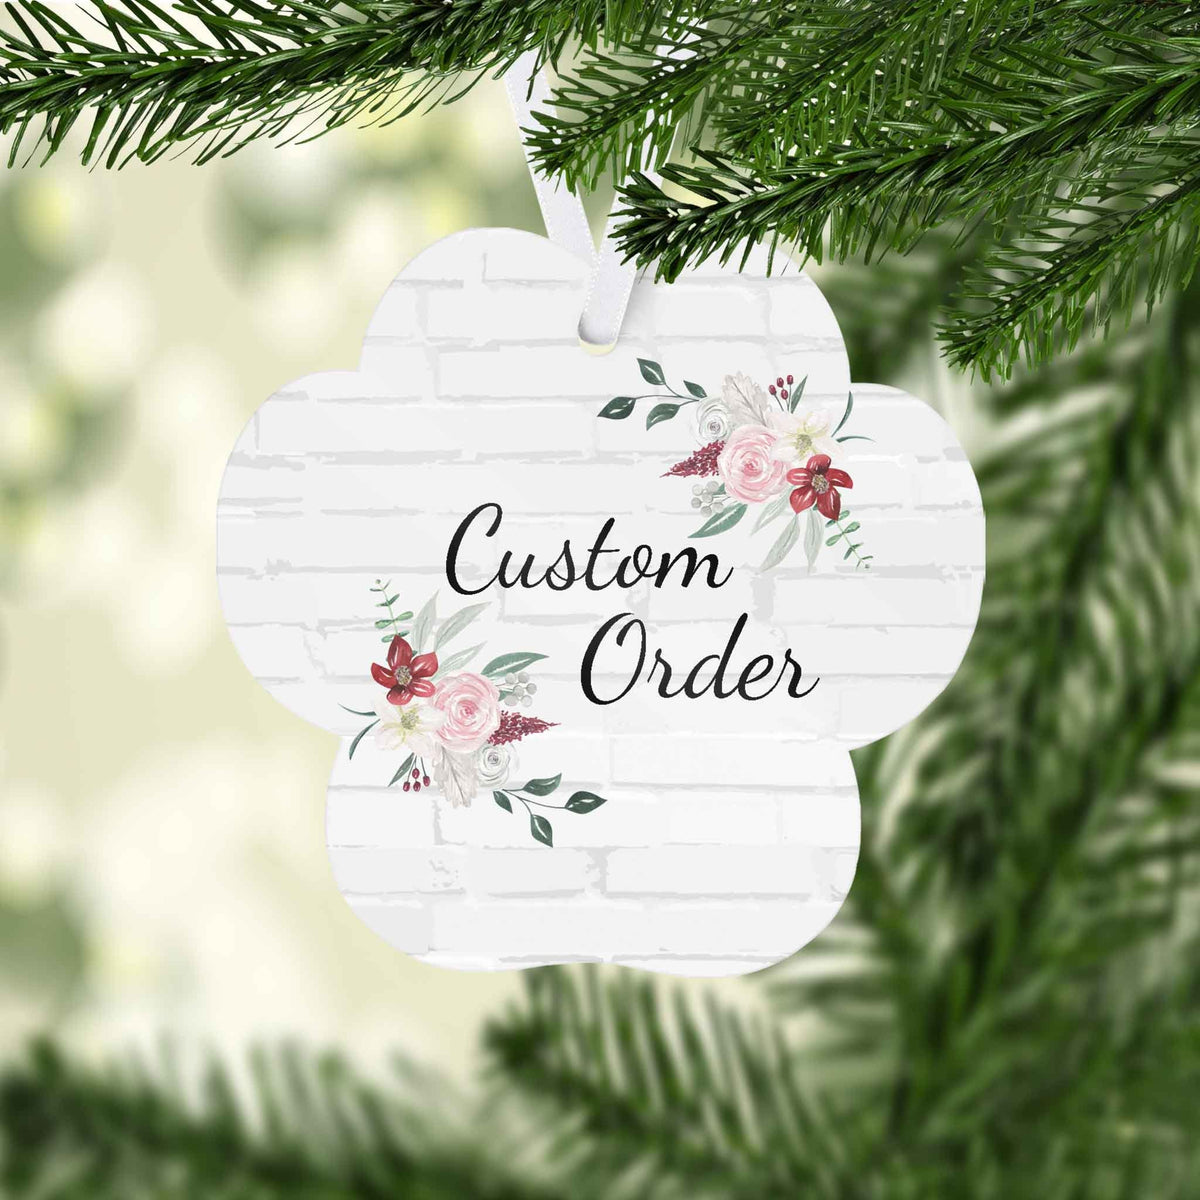 Photo Holiday Ornaments | Personalized Christmas Ornaments | Custom Order